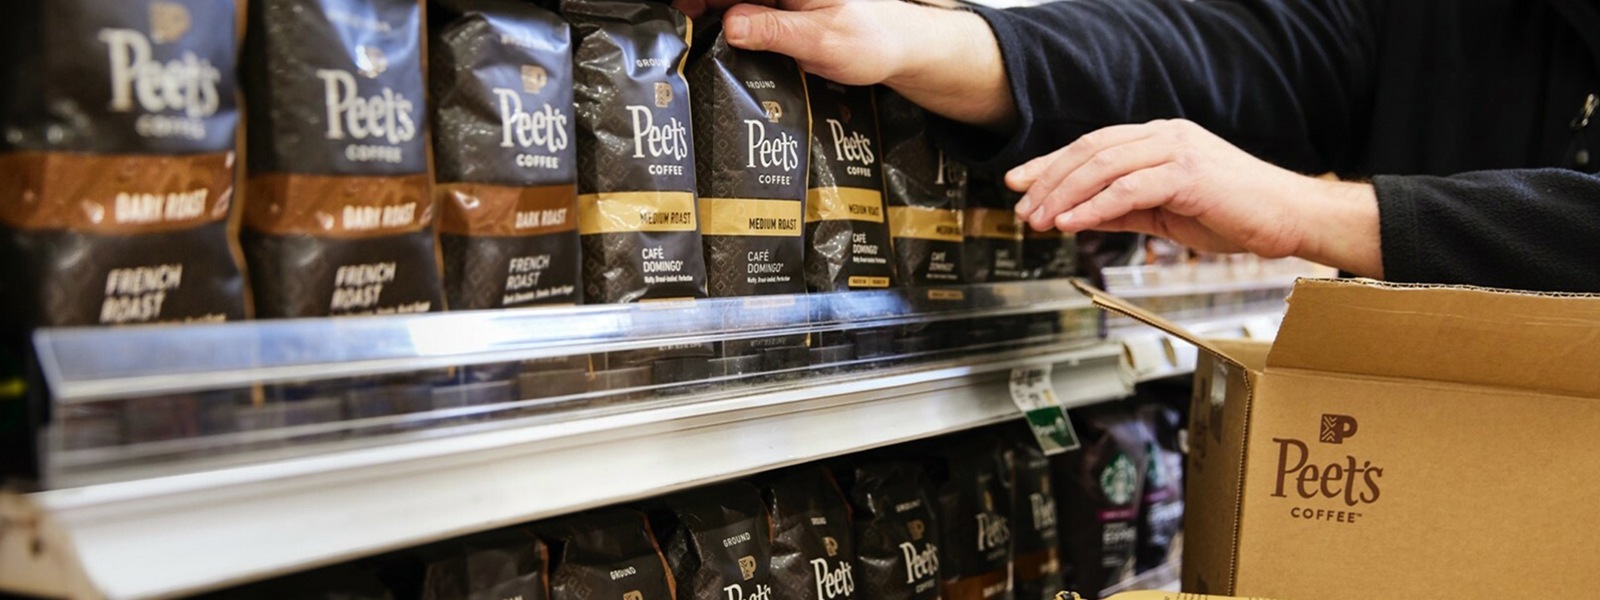 Bags of Peet's Coffee being placed on a grocery store shelf